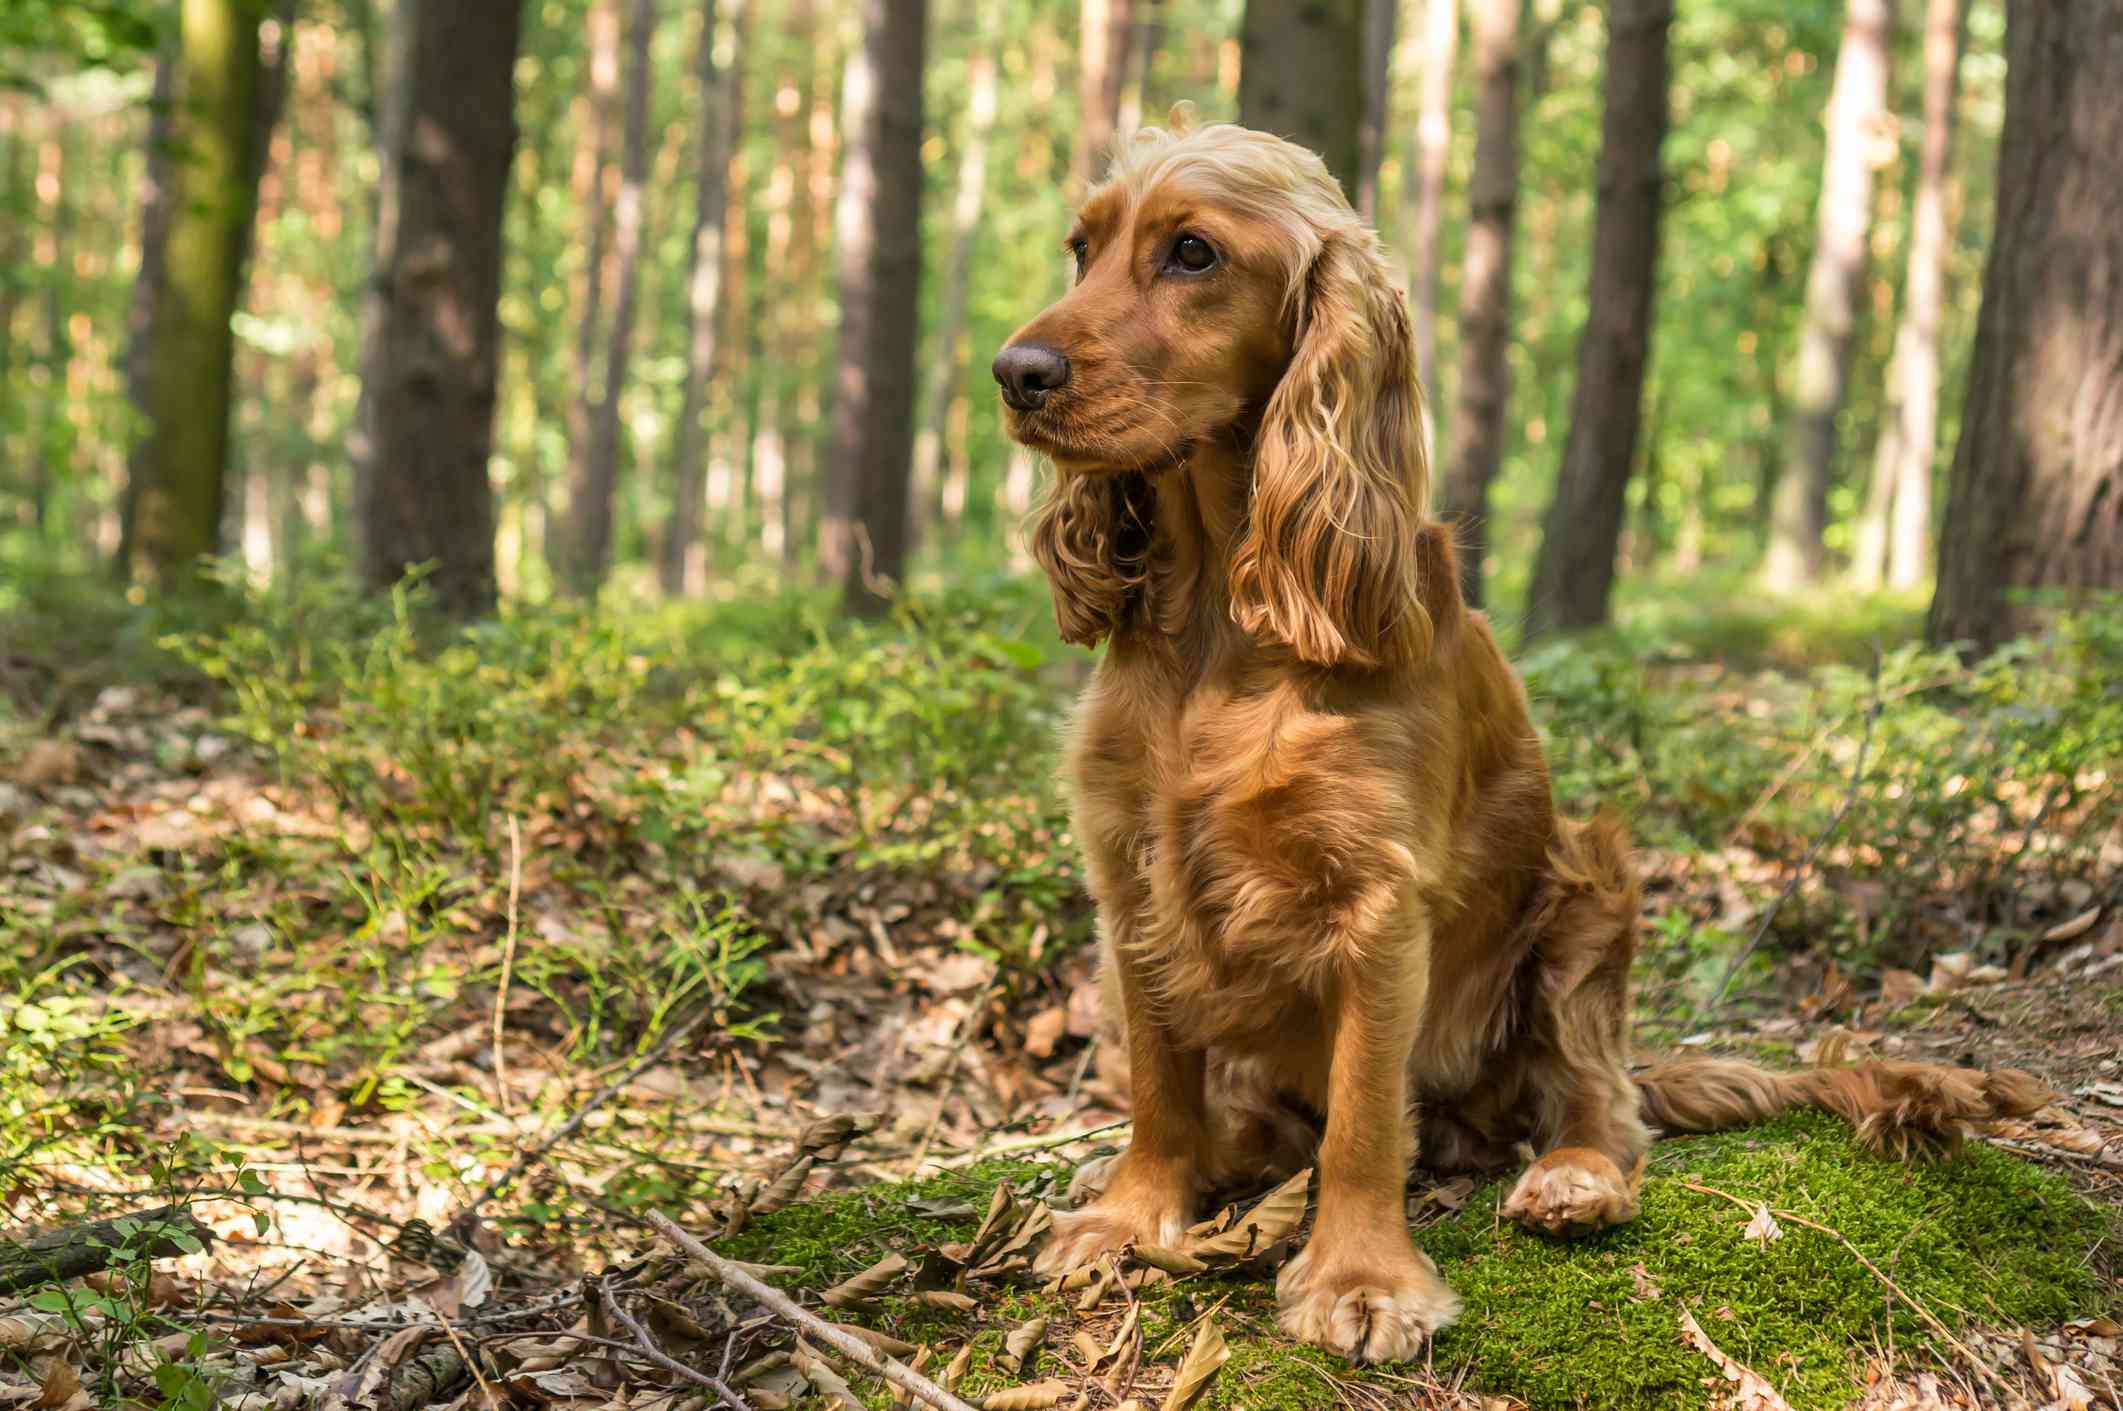 English Cocker Spaniel sitting in a forest